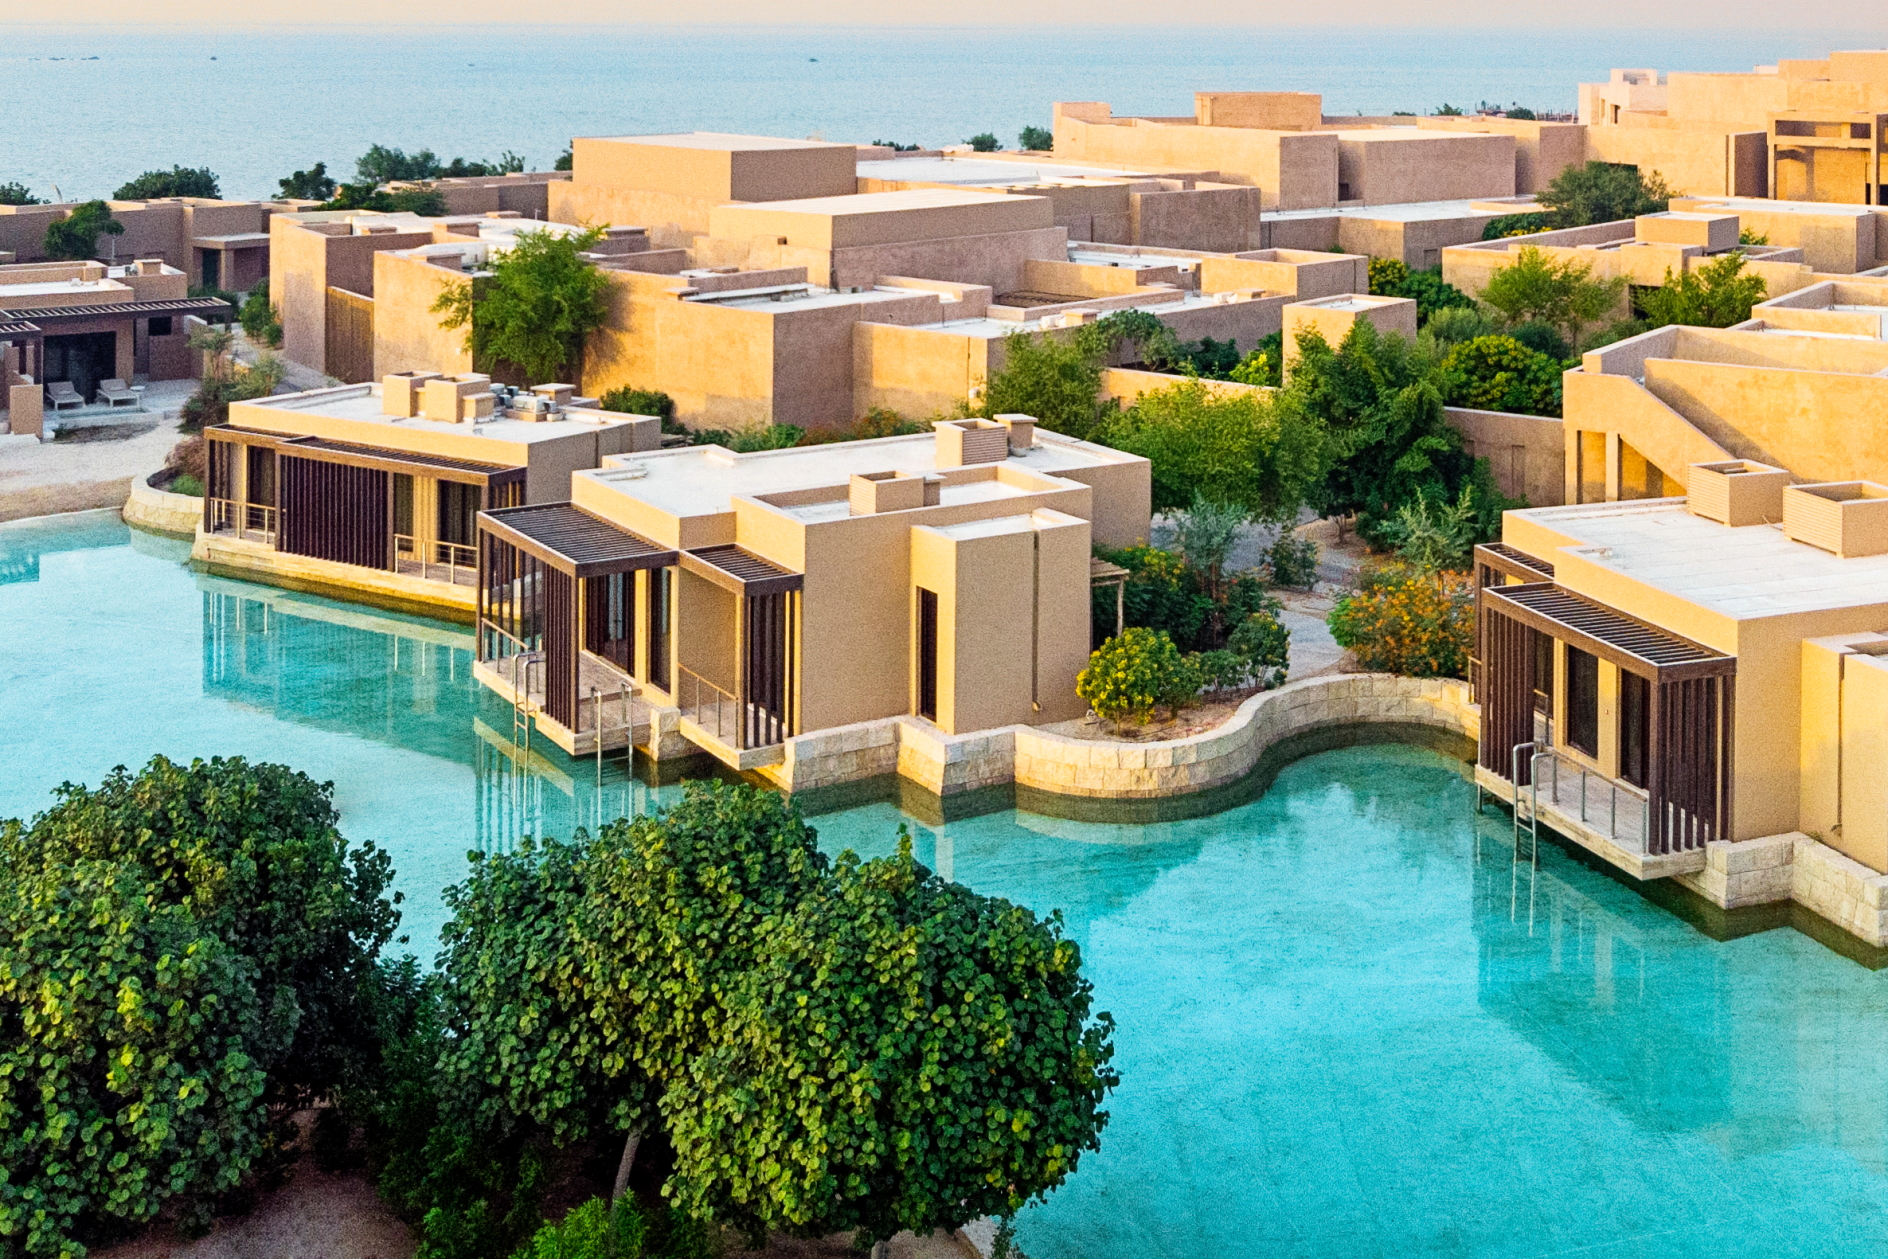 Zulal Serenity at Zulal Wellness Resort by Chiva-Som in Qatar. Click to enlarge.